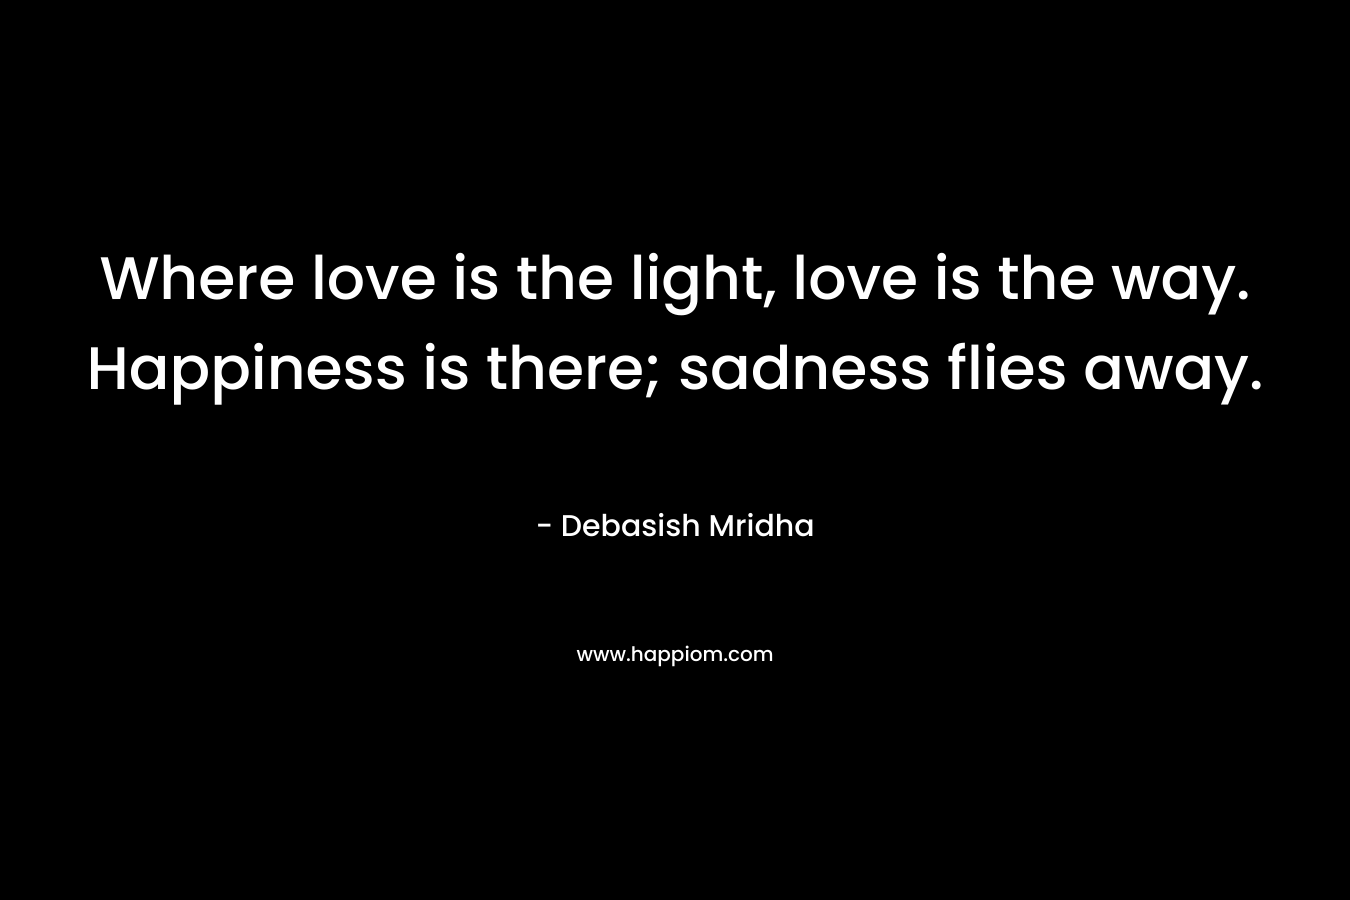 Where love is the light, love is the way. Happiness is there; sadness flies away.